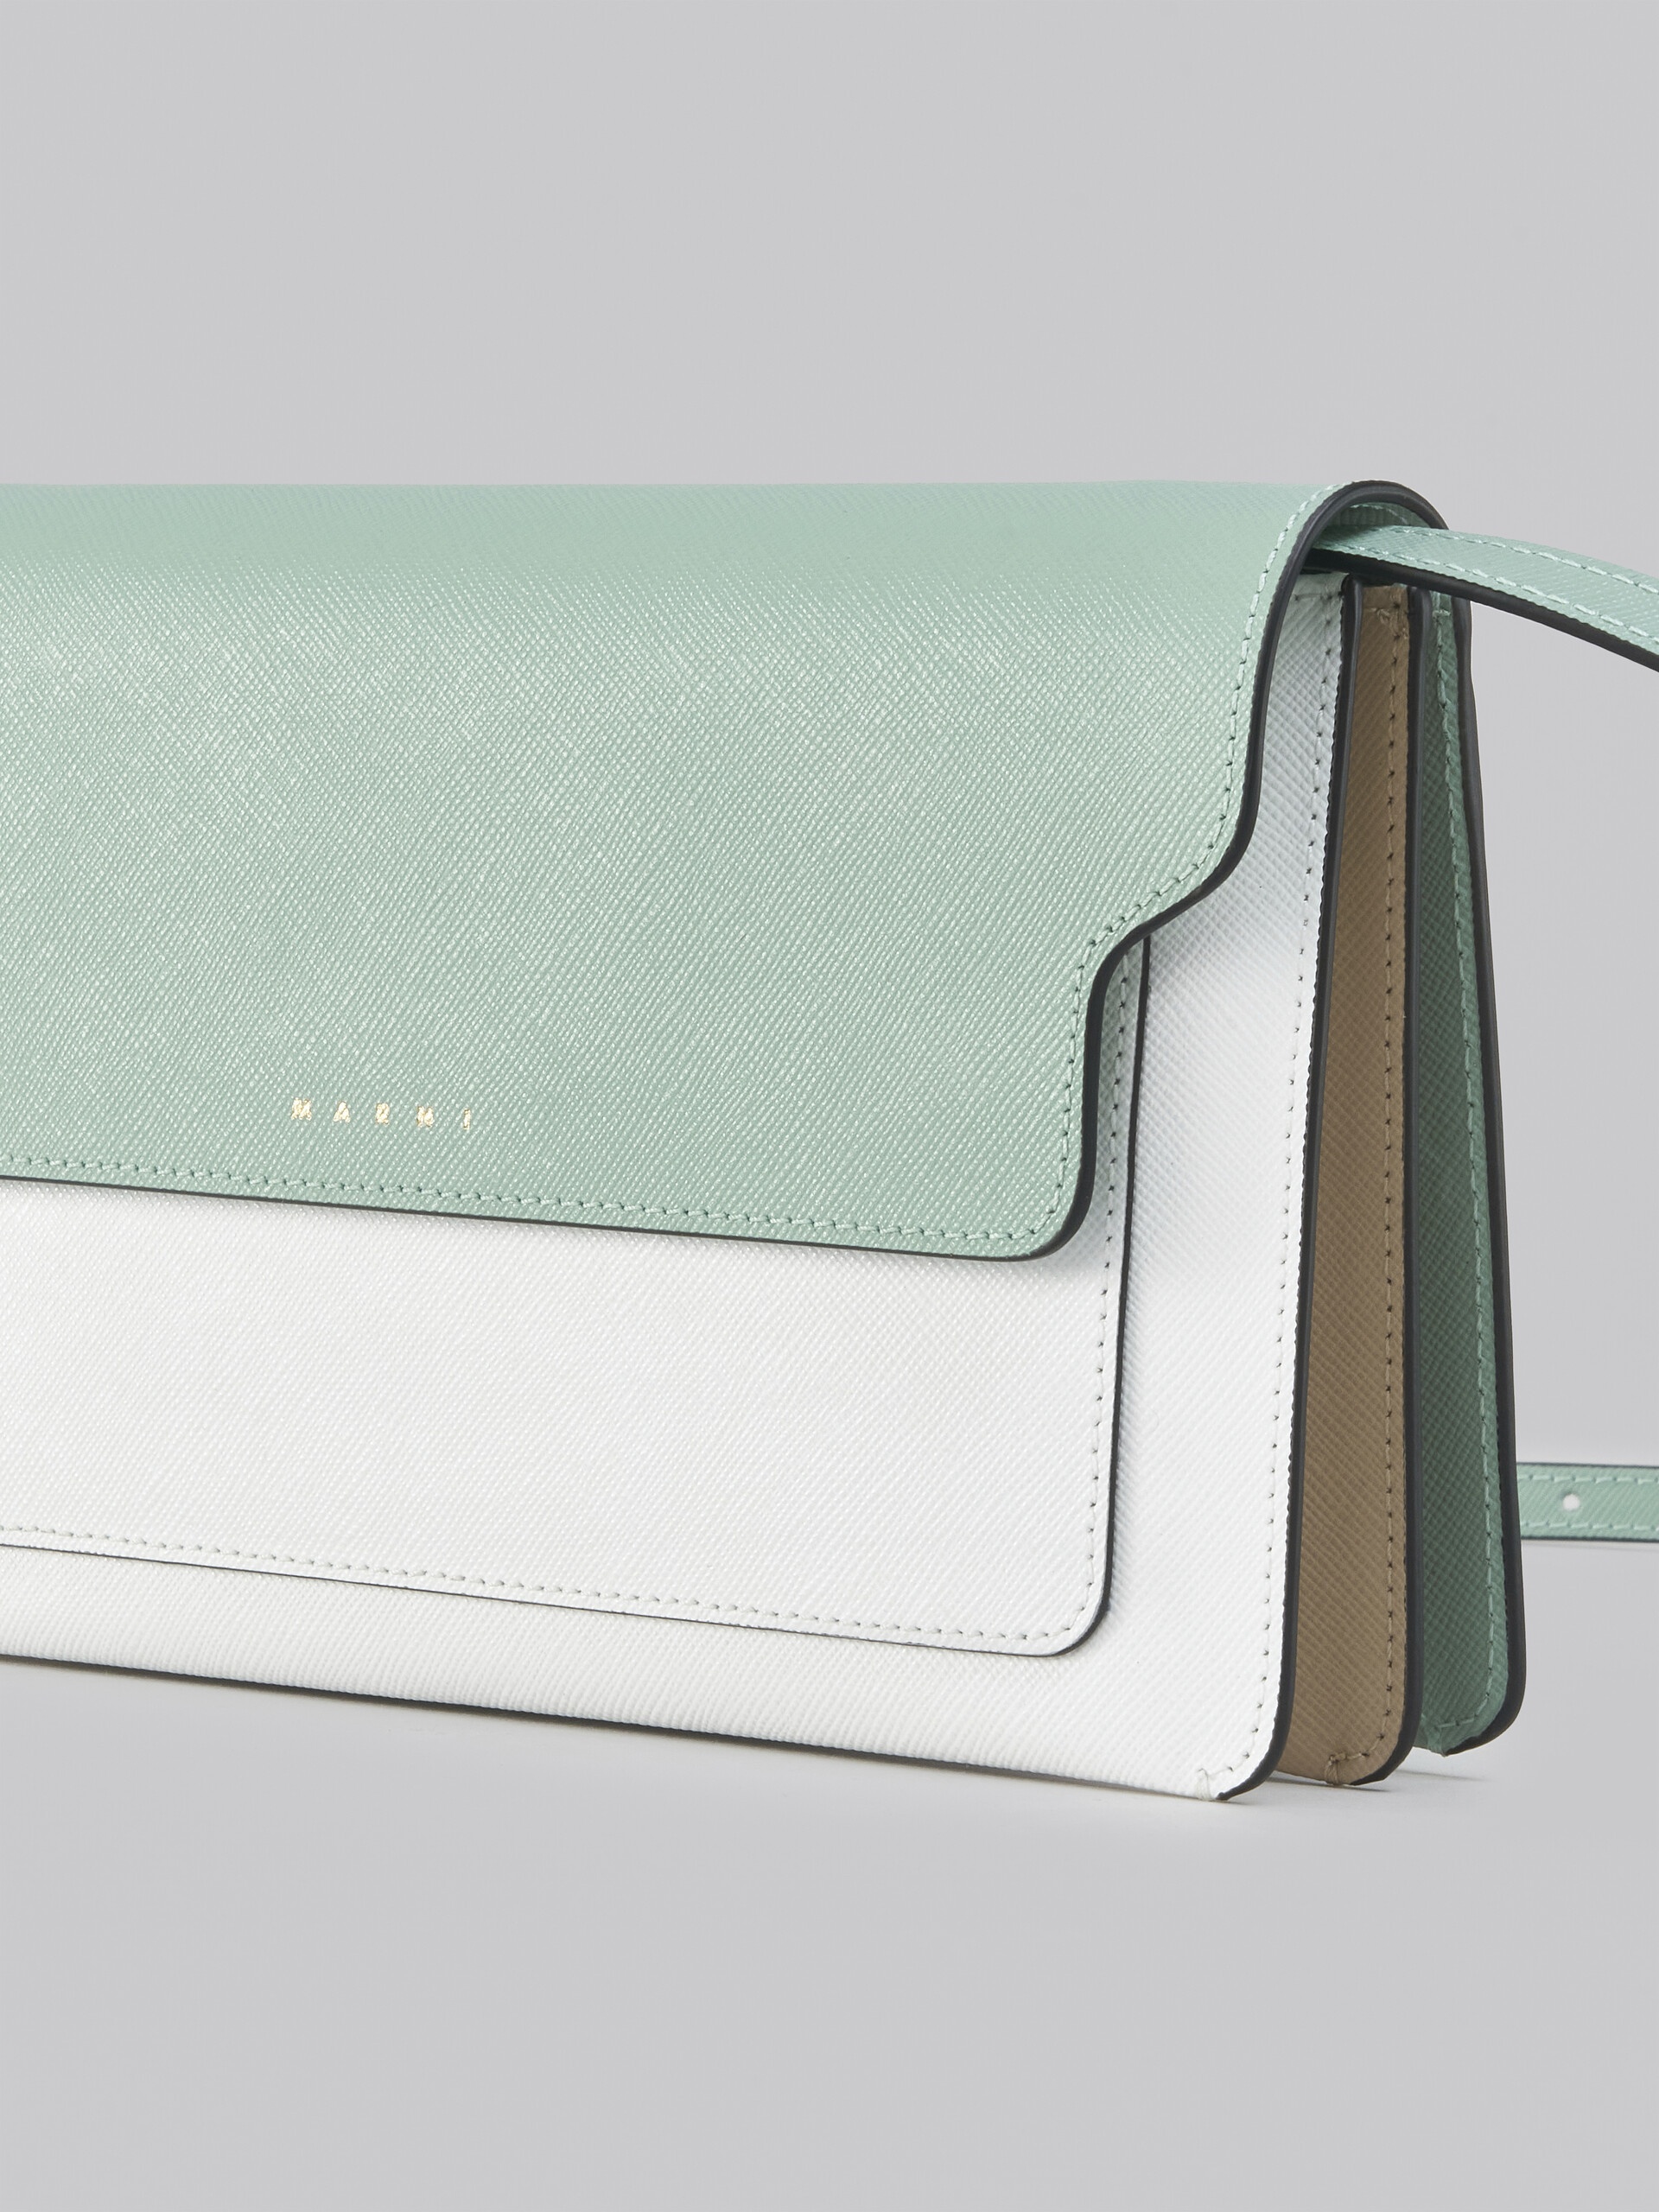 TRUNK CLUTCH IN LIGHT GREEN WHITE AND BROWN SAFFIANO LEATHER - 4